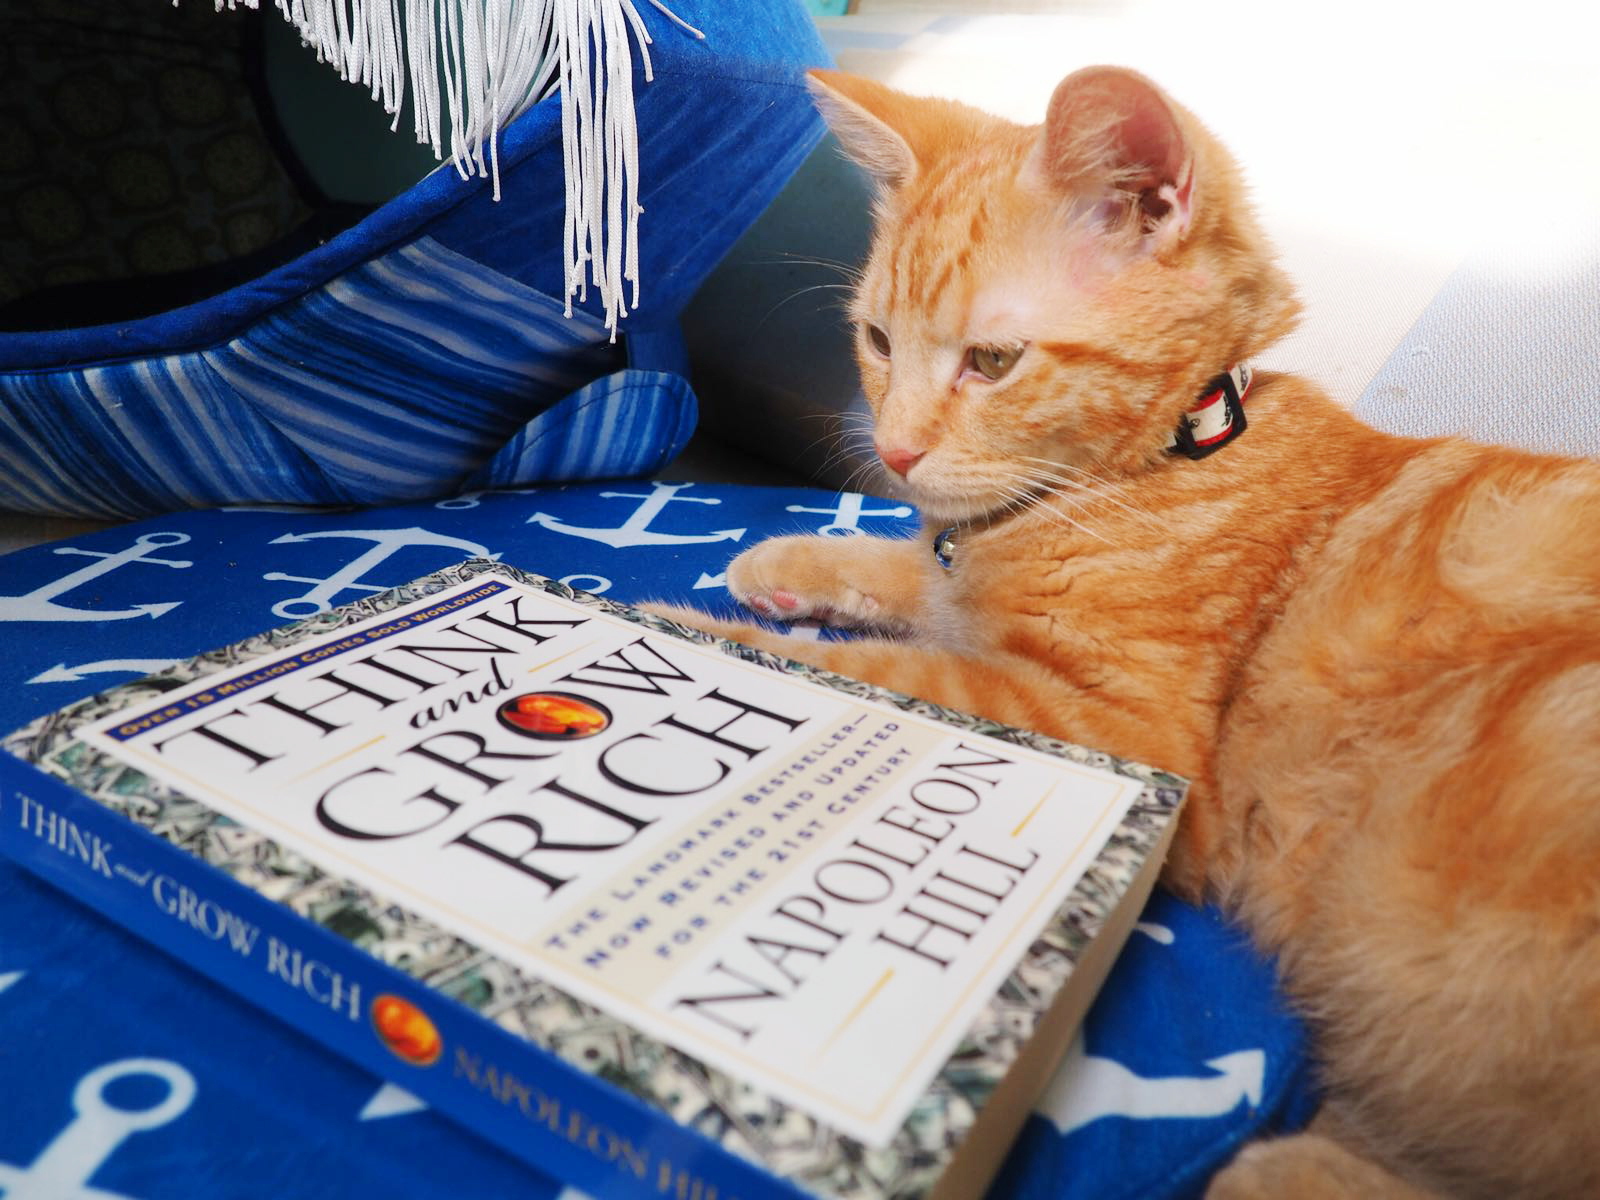 Meet Captain Ahab - Our New Sailor Cat Who Will Sail Around the World With Us